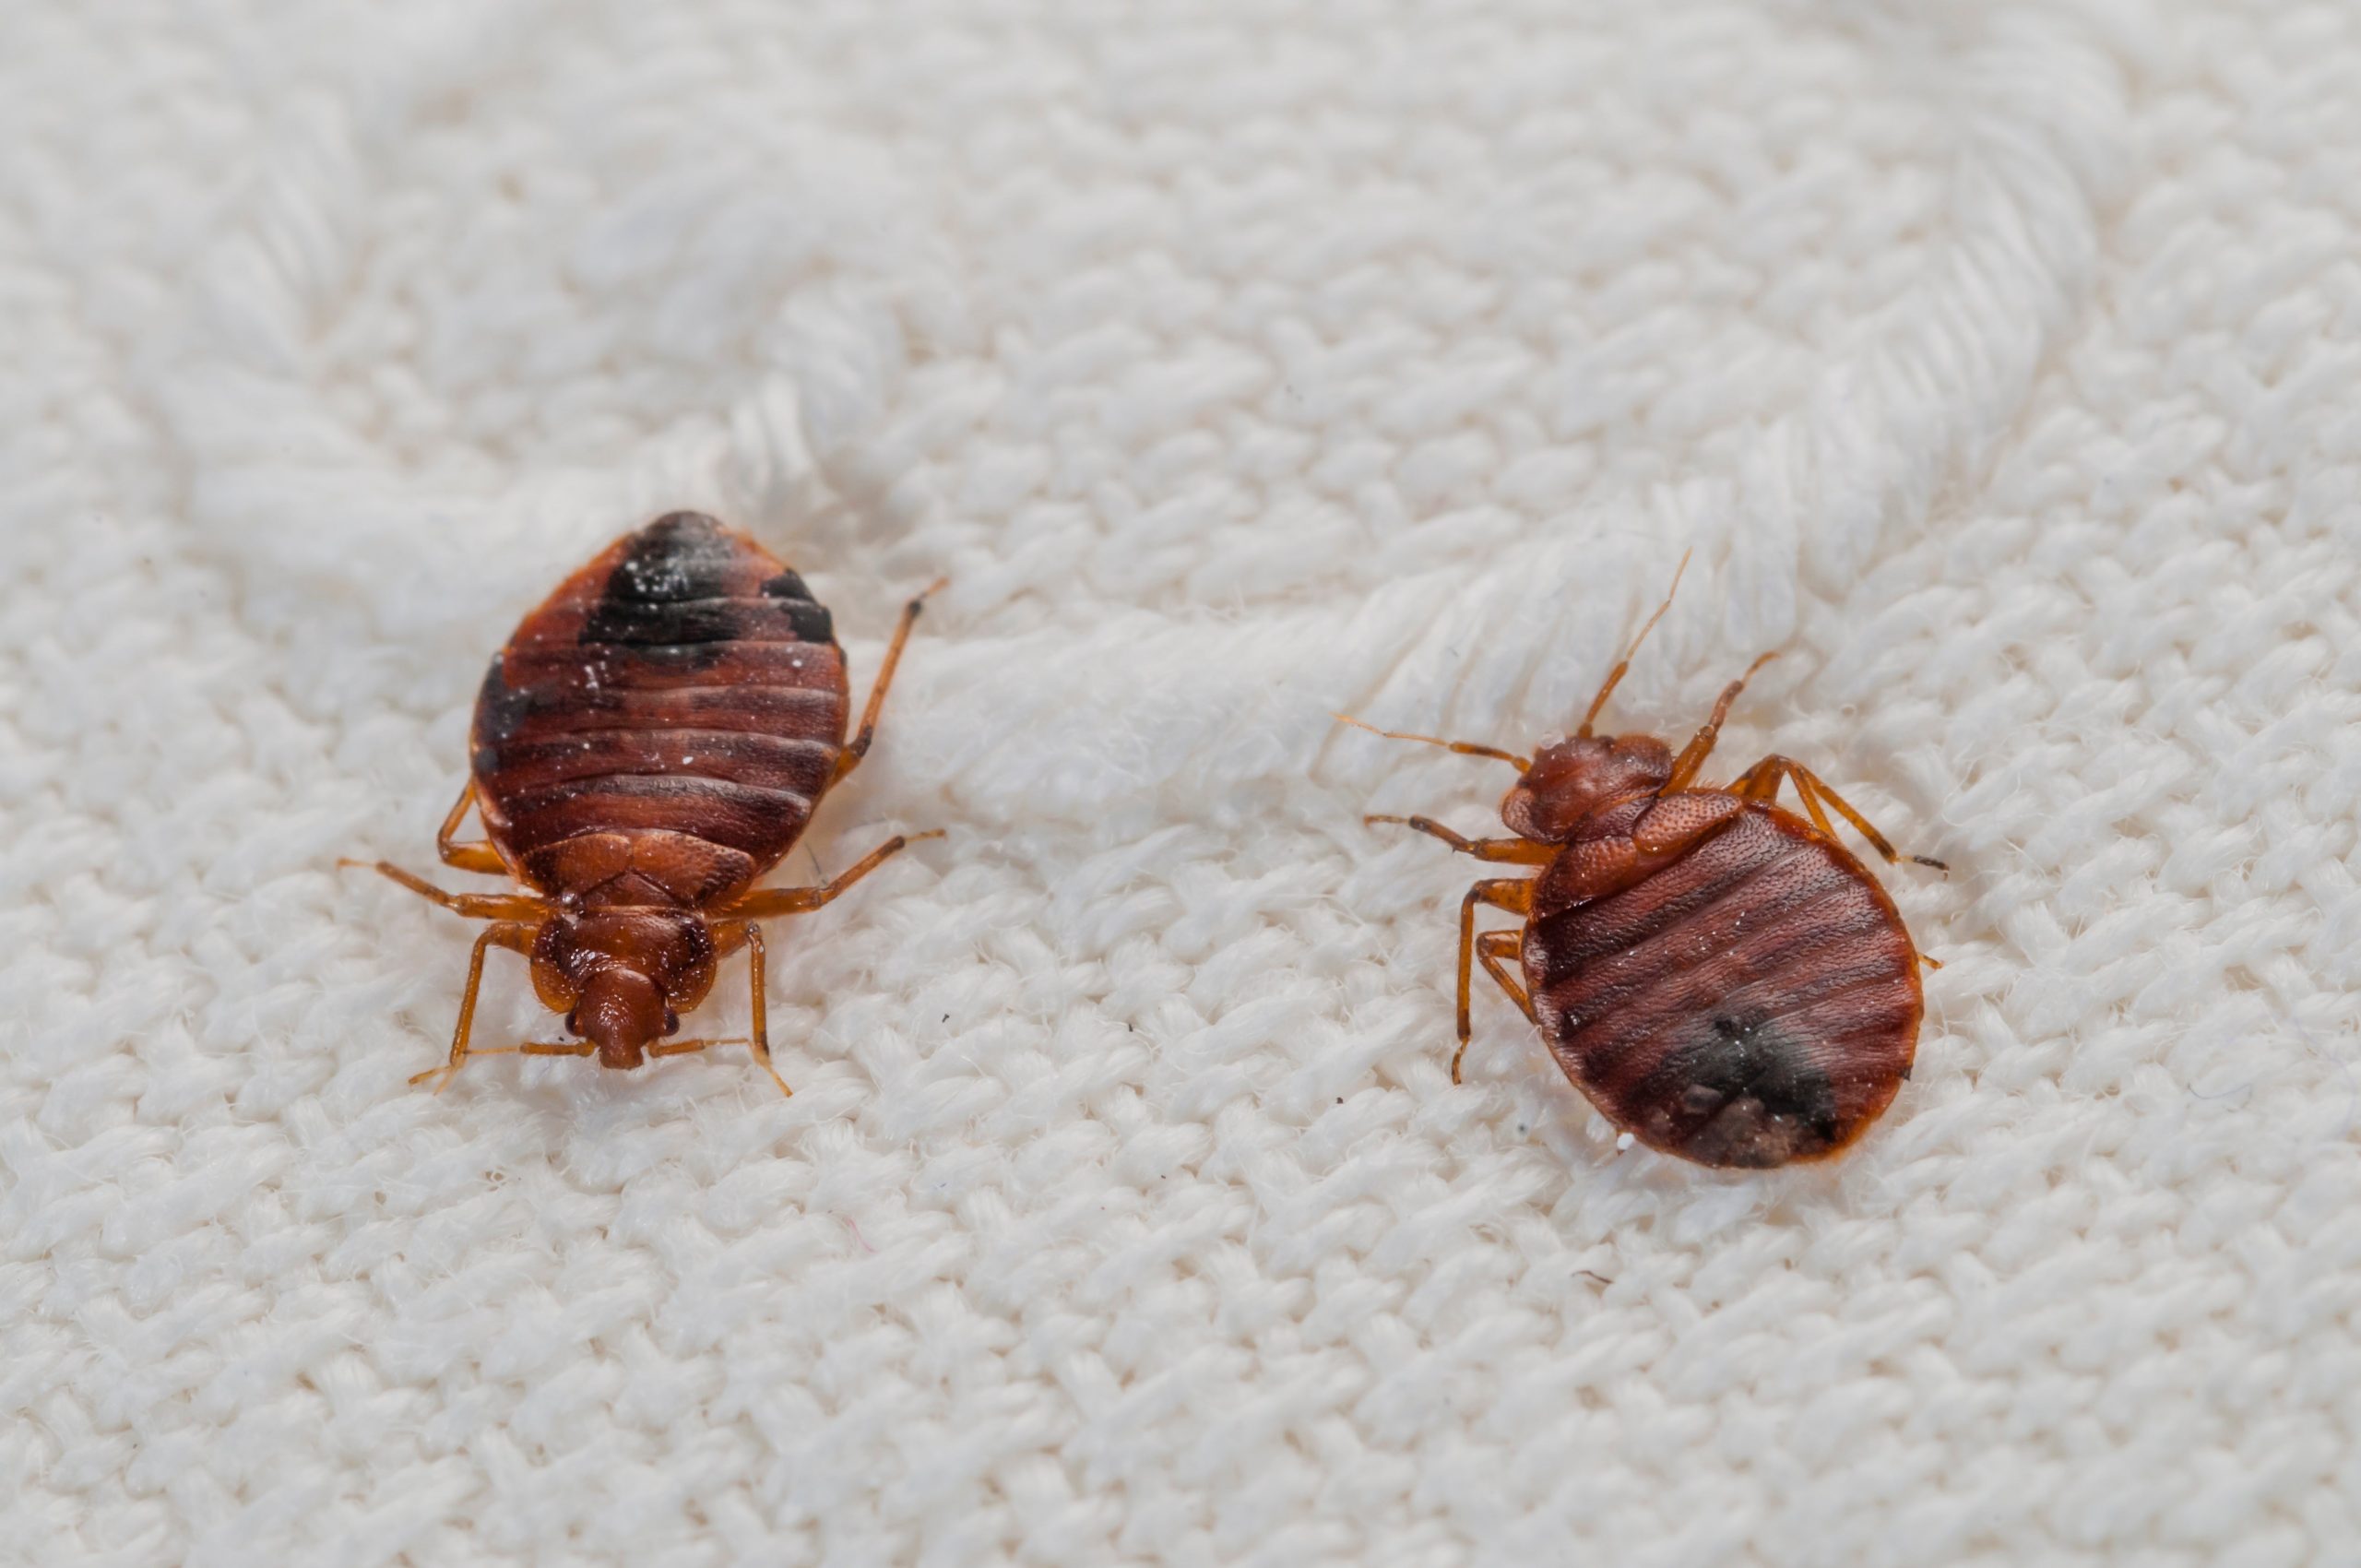 can bed bugs live outside of mattresses